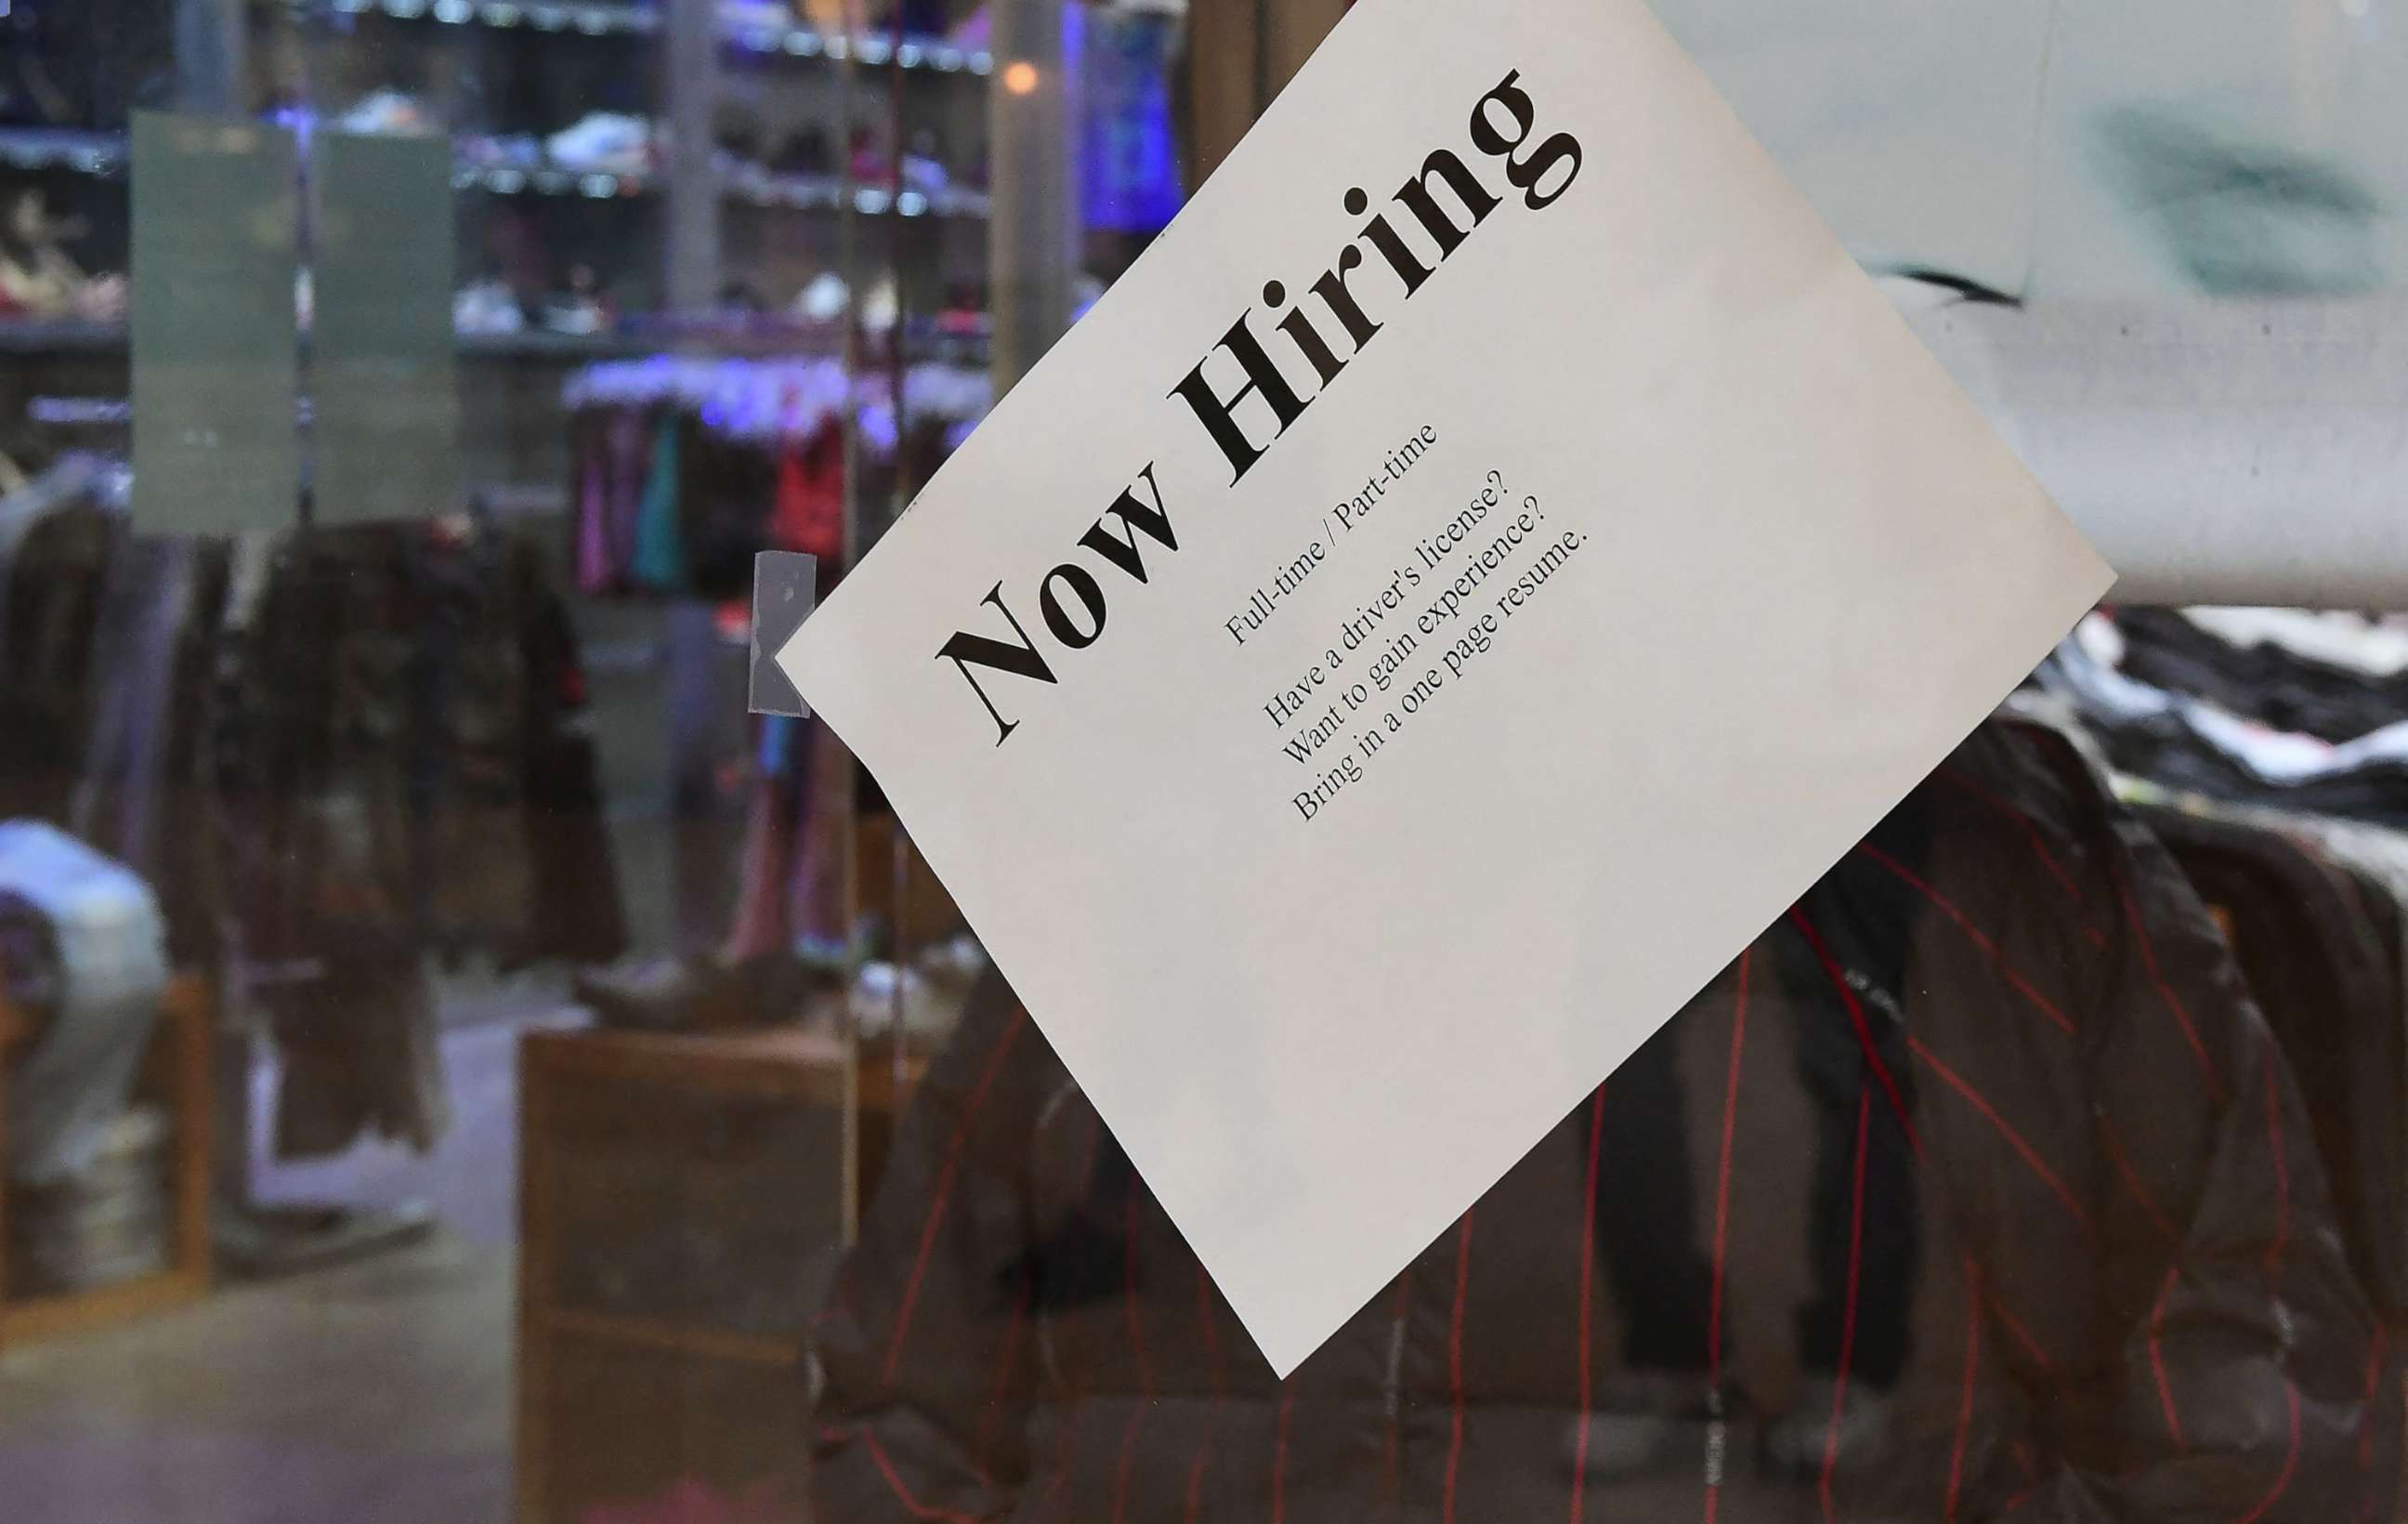 PHOTO: A "Now Hiring" sign is placed on the glass store front of a store in Montebello, Calif., Dec 9, 2021.